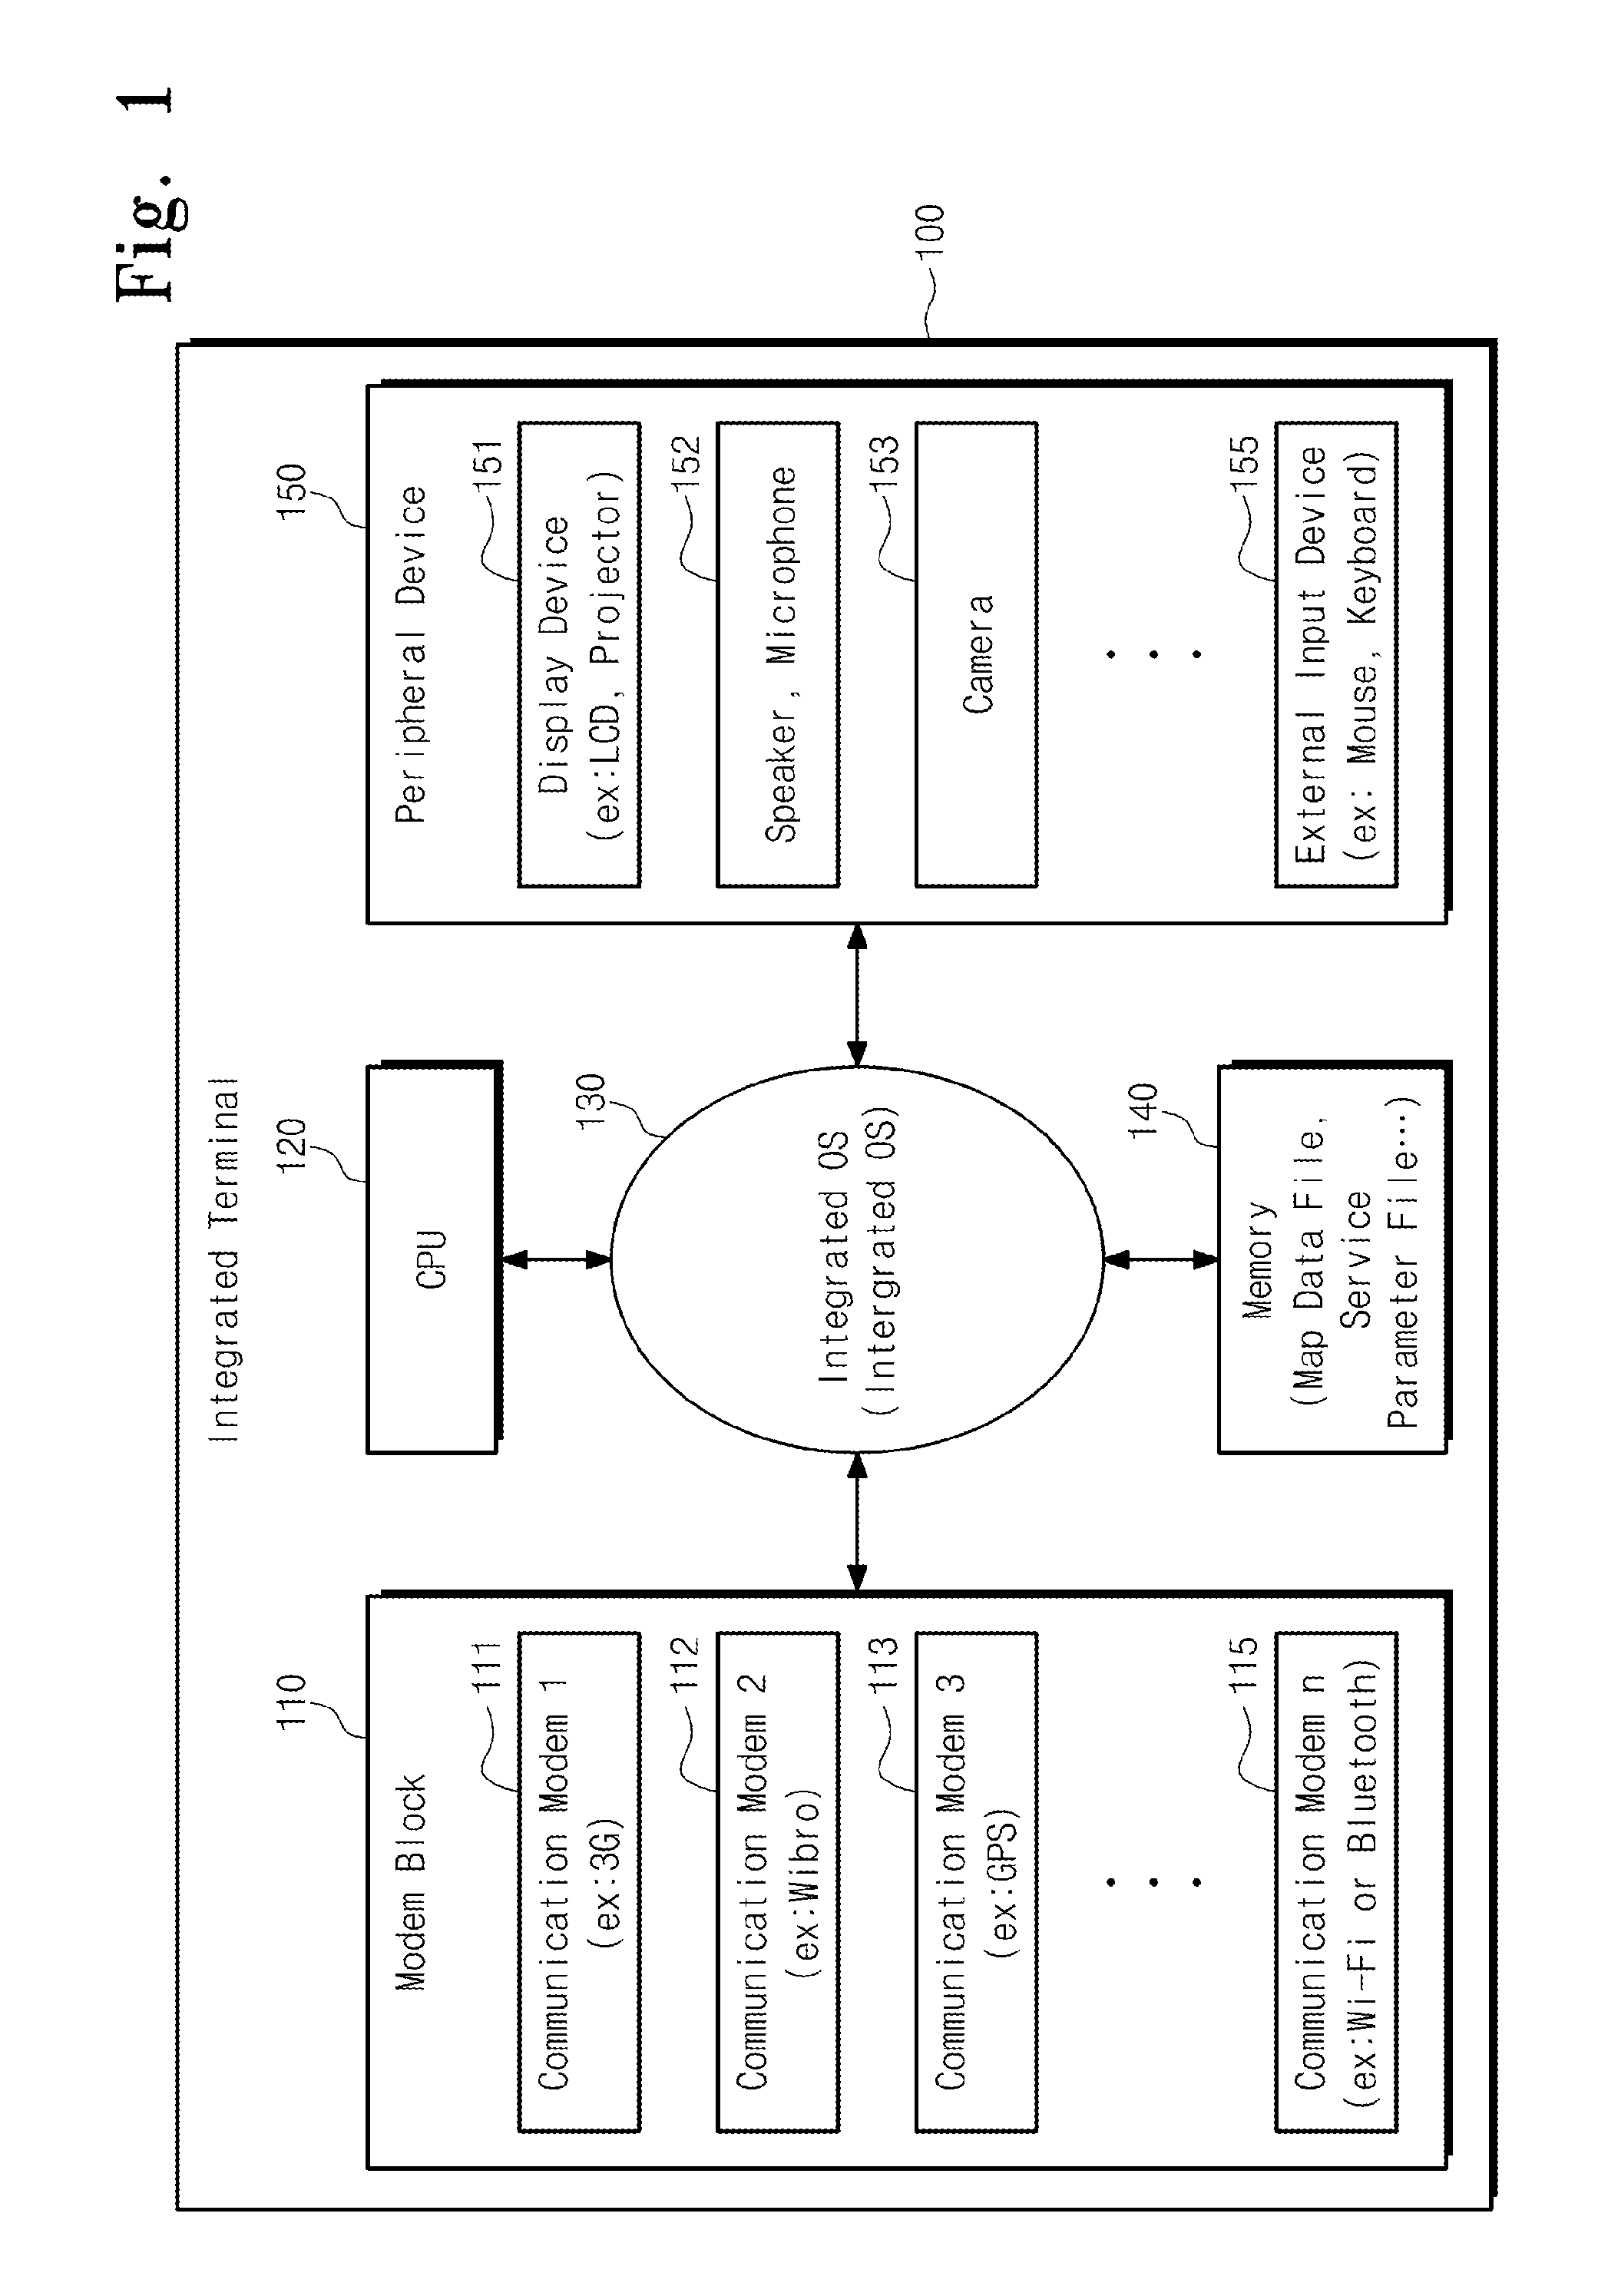 Location information decision method in integrated terminal